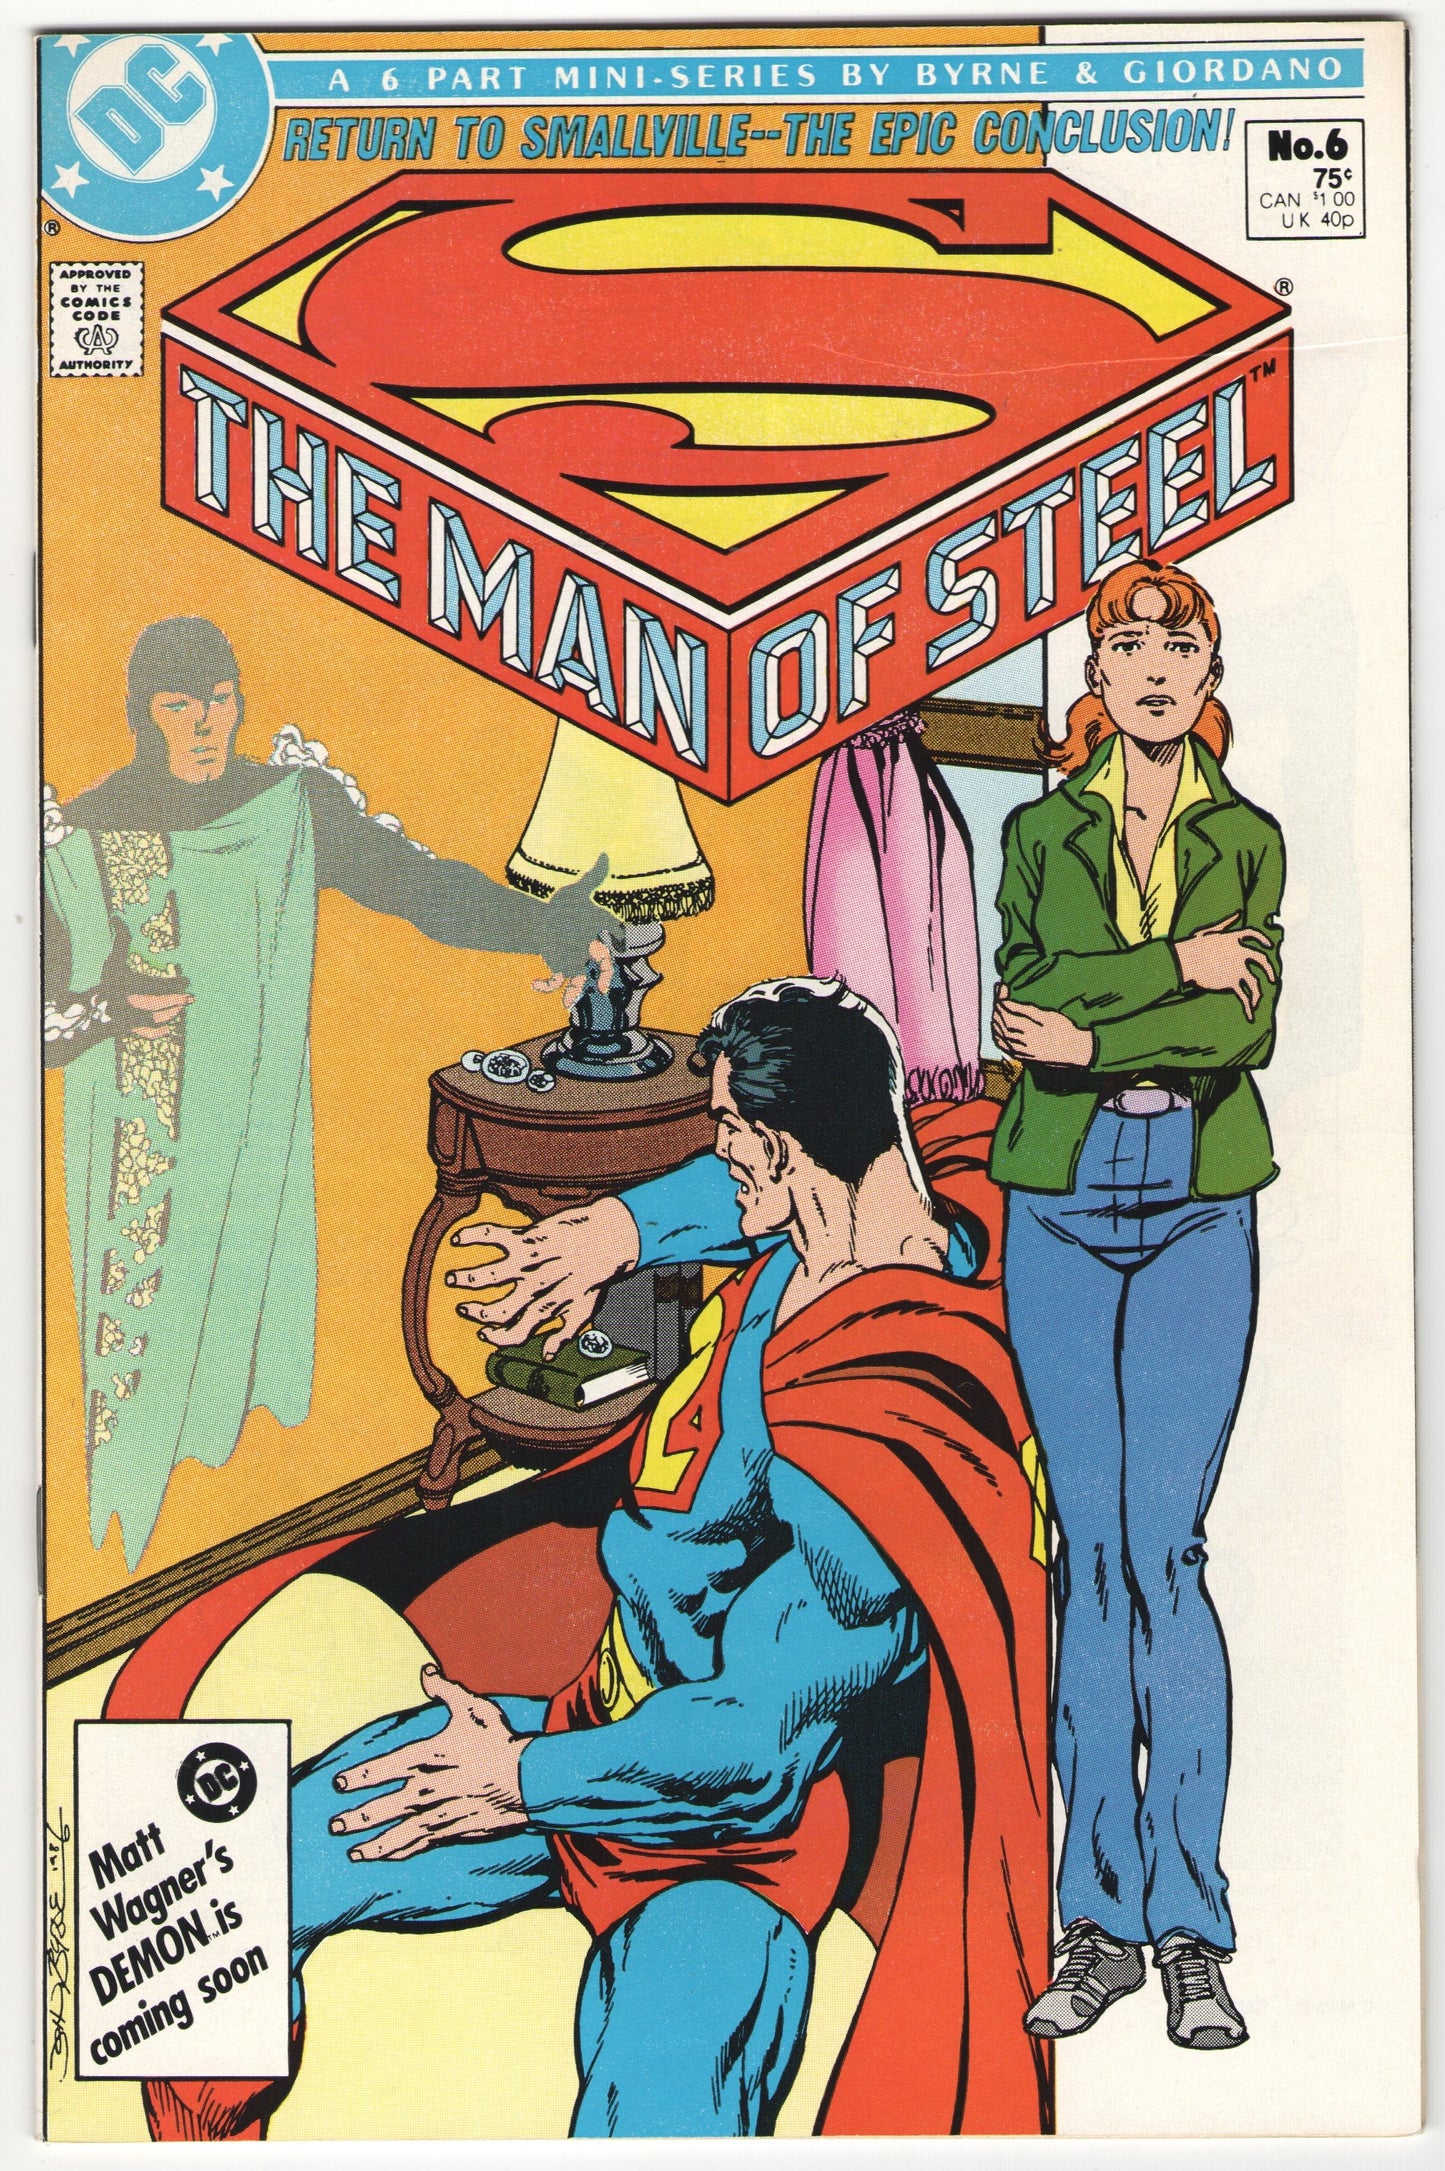 Man of Steel (1986) Complete Limited Series